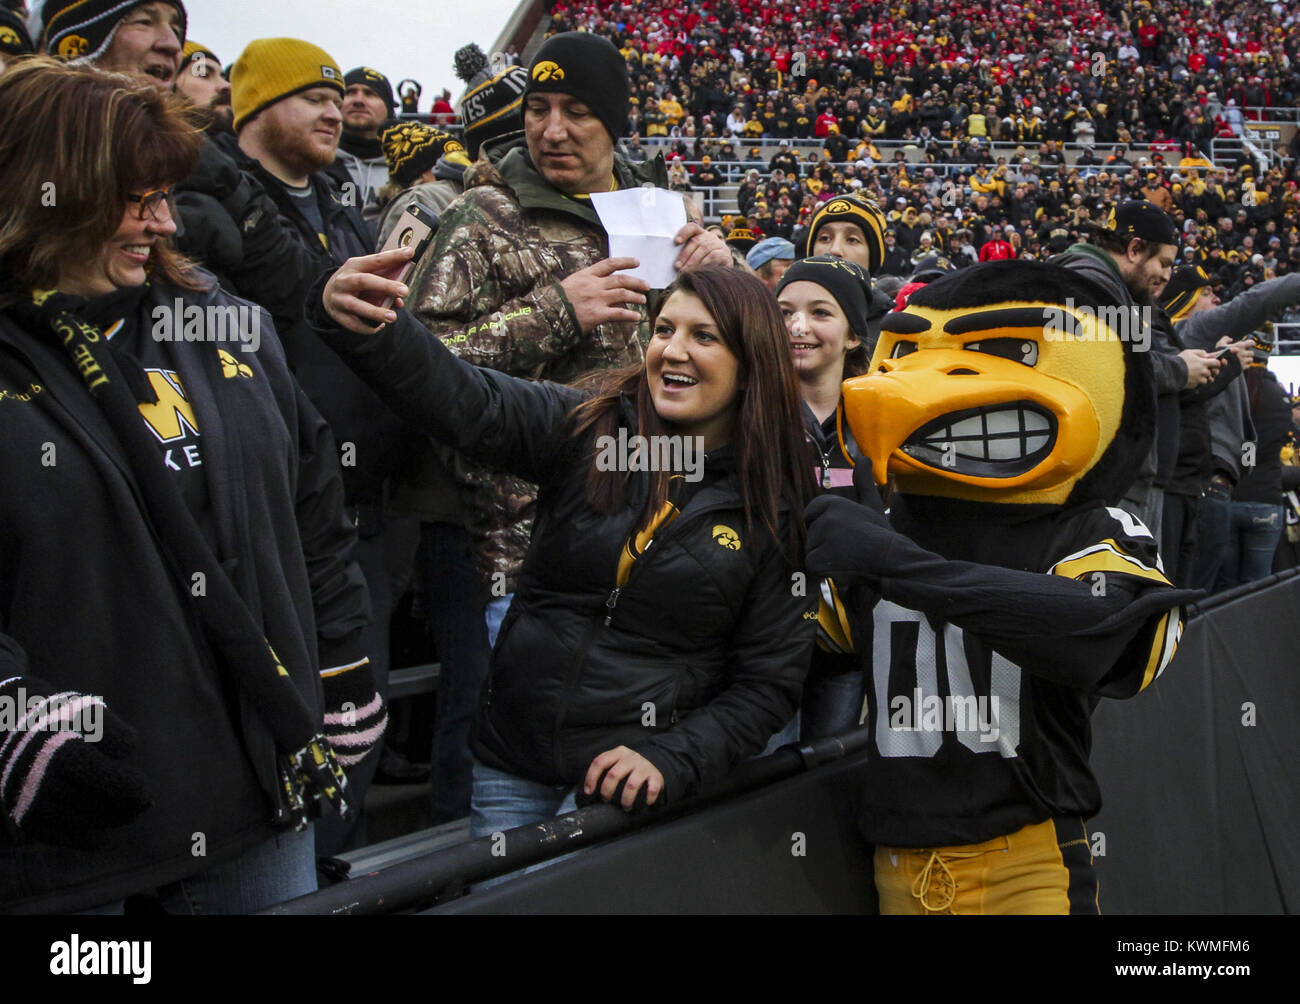 November 25, 2016 - Iowa City, Iowa, U.S. - University of Iowa Hawkeye mascot, Herky, takes photos with fans during the second quarter of their game against the Nebraska Cornhuskers at Kinnick Stadium in Iowa City on Friday, November 25, 2016. (Credit Image: © Andy Abeyta/Quad-City Times via ZUMA Wire) Stock Photo